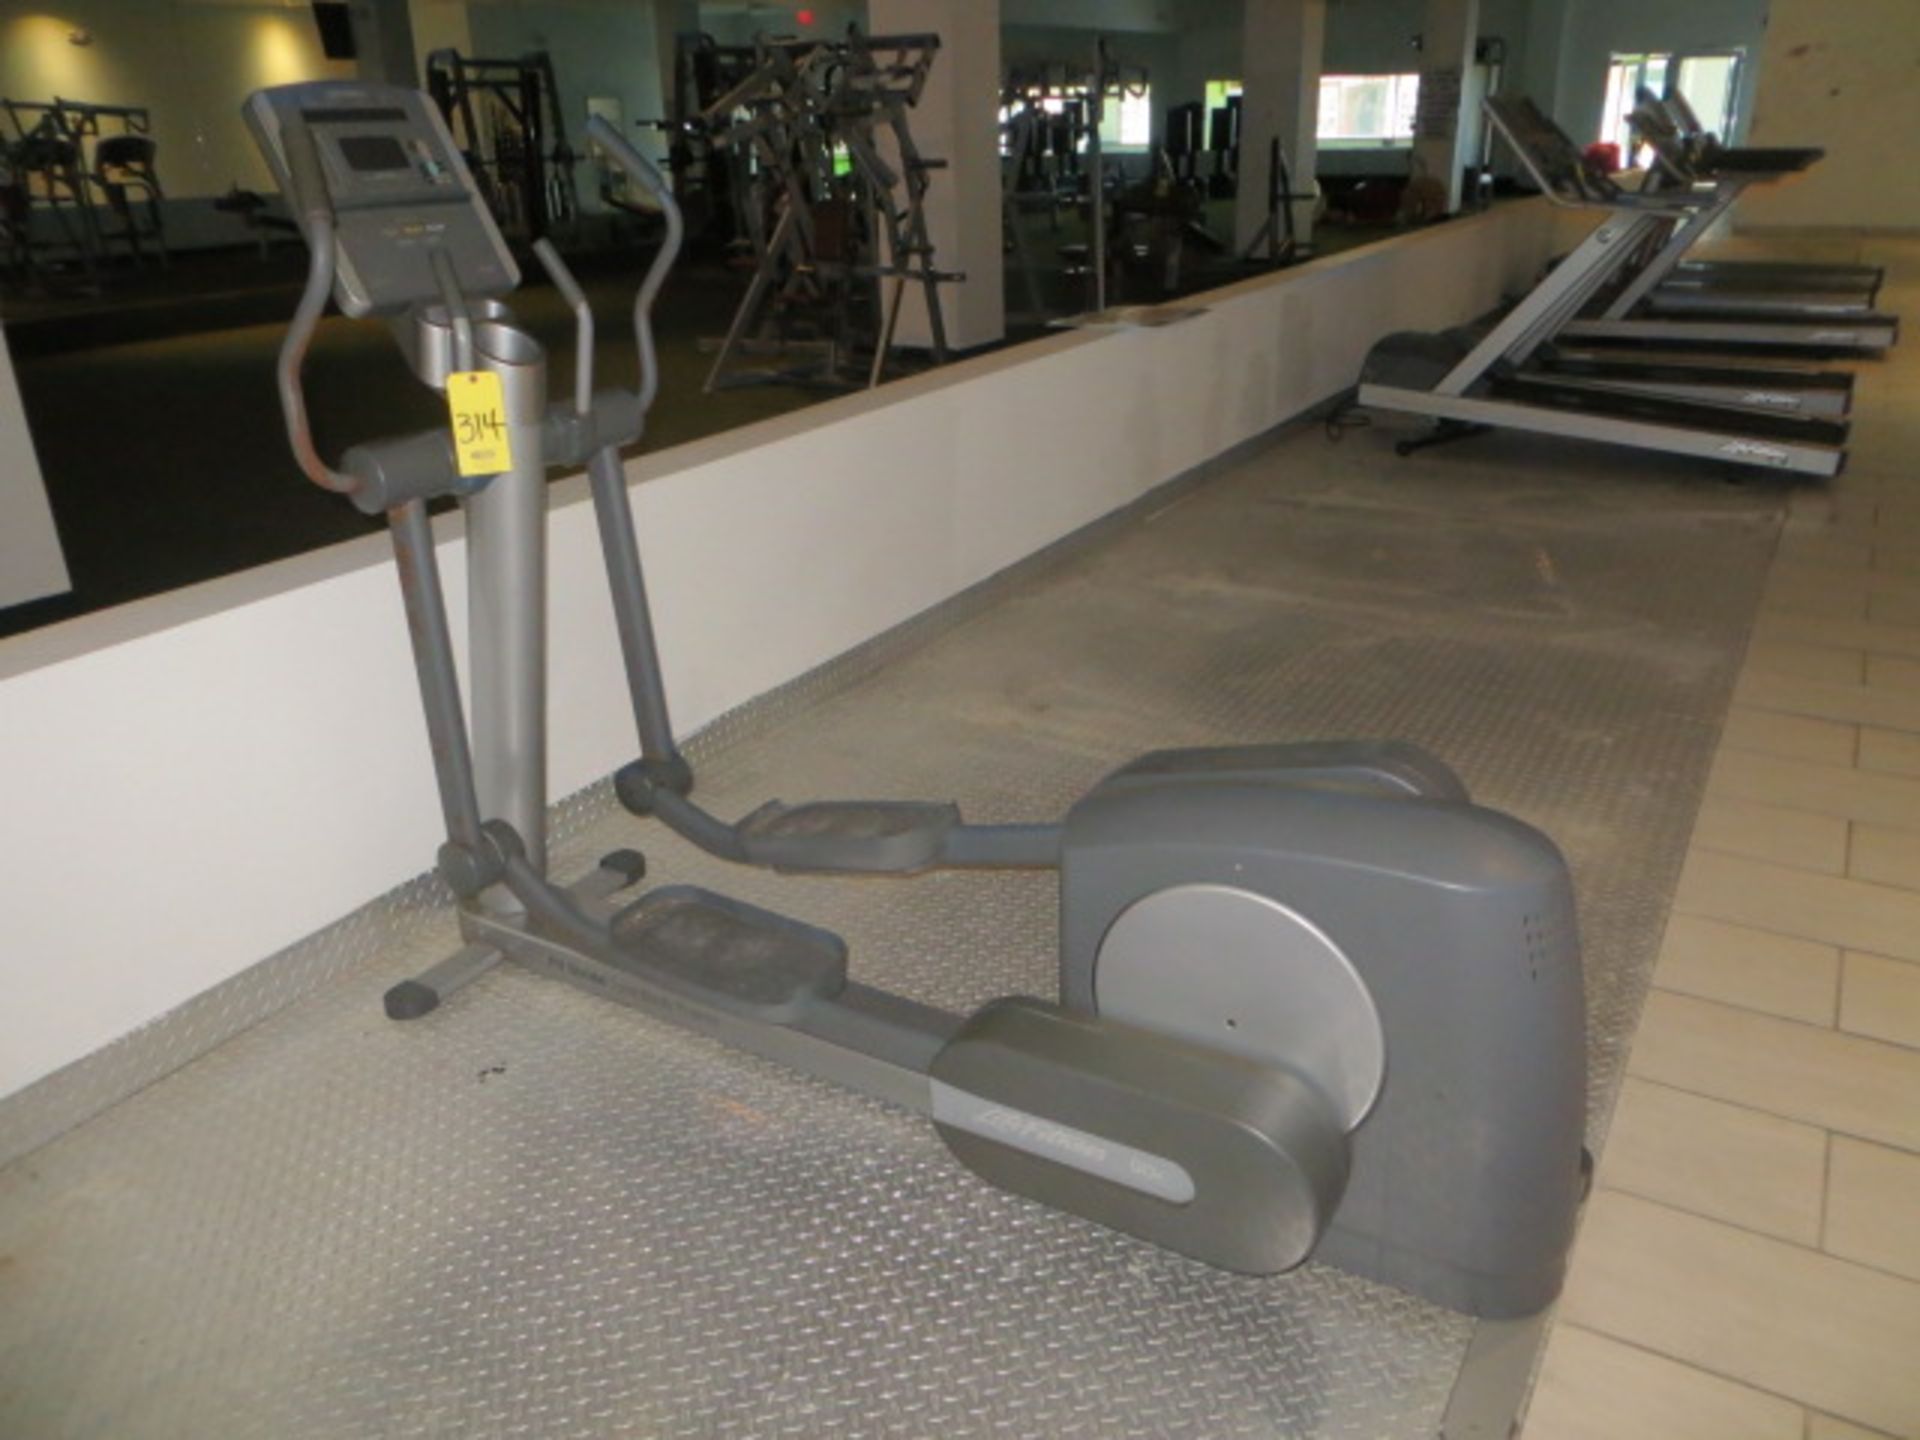 LIFE FITNESS 90X FIT STRIDE TOTAL BODY TRAINER - rust on arms (Pitman, NJ)